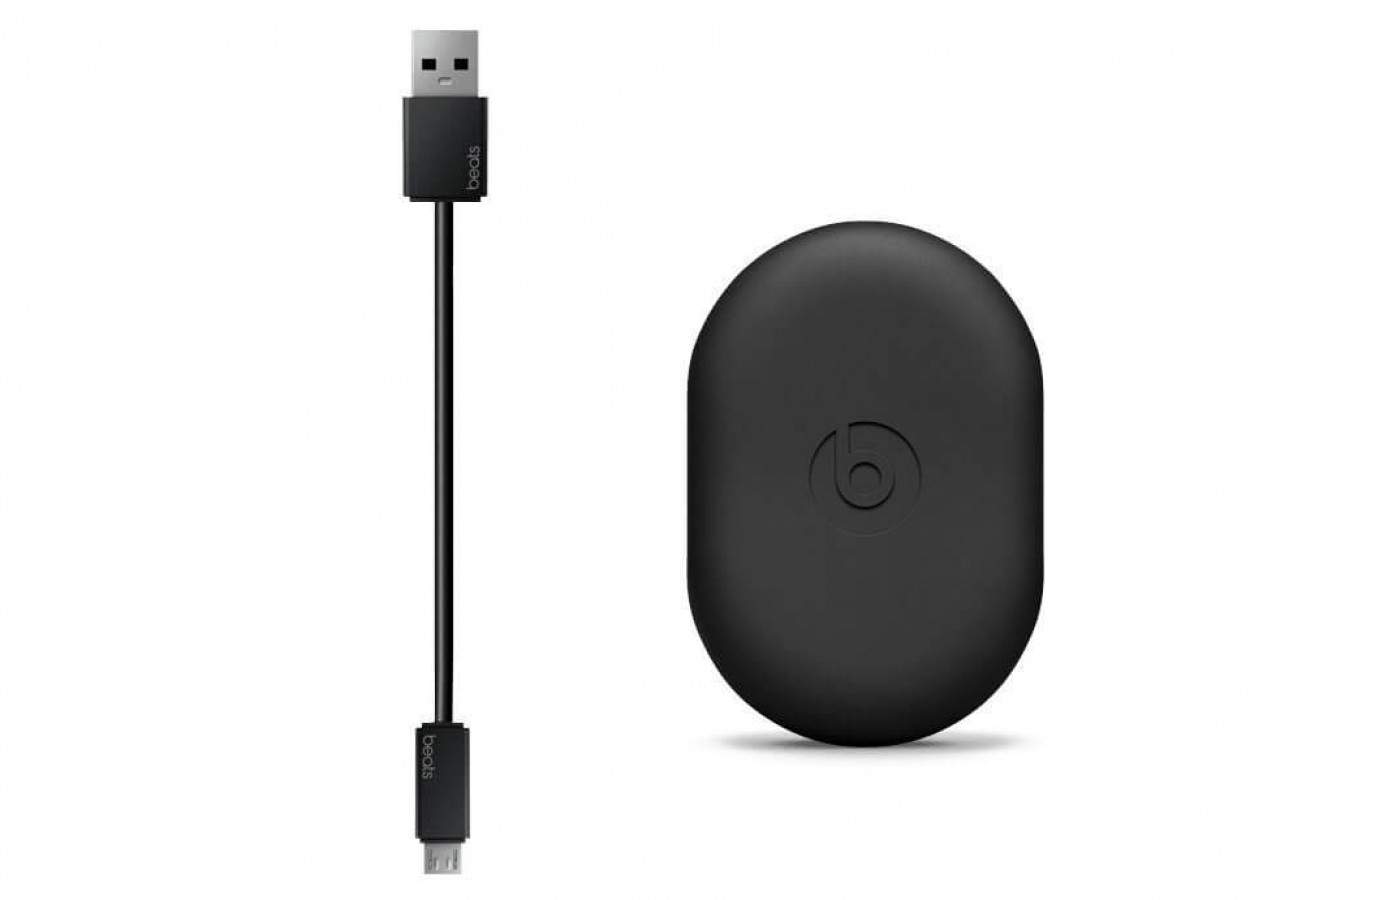 The power source and charging cable for the Powerbeats 3.